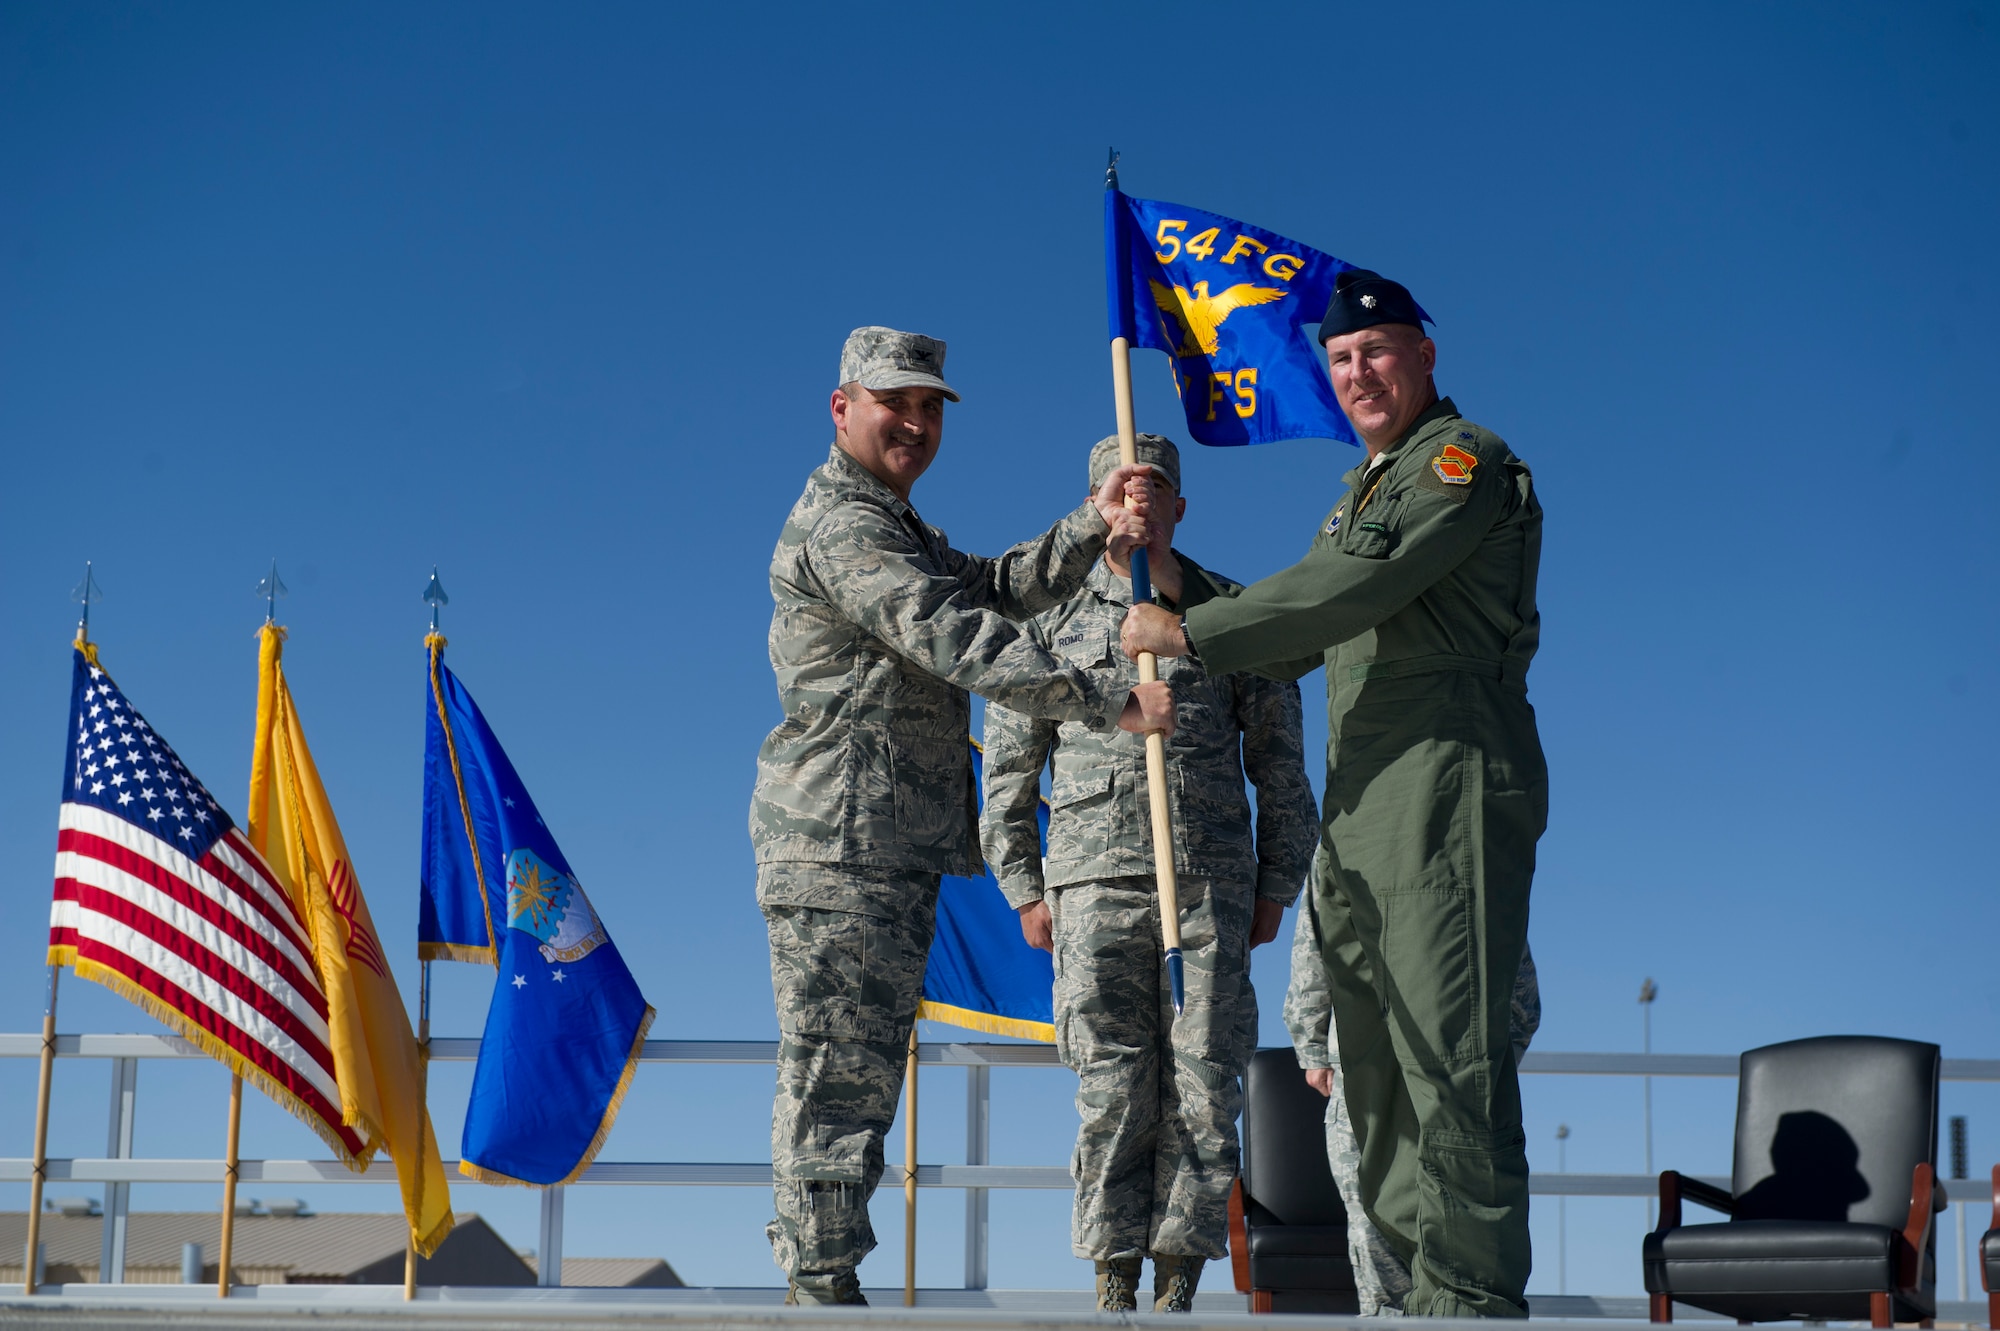 Col. Rodney Petithomme, 54th Fighter Group commander, passes the guidon of the 311th Fighter Squadron to Lt. Col. Scott Frederick during the 54th Fighter Group activation ceremony at Holloman Air Force Base, N.M., March 11. The 54th Fighter Group, a tenant unit at Holloman, is a detachment the 56th Fighter Wing at Luke Air Force Base, Ariz., and will ultimately operate two F-16 Fighting Falcon aircraft training squadrons. The 54th Fighter Group plus three squadrons were activated at the ceremony: the 311th Fighter Squadron, the 54th Operations Support Squadron and the 54th Aircraft Maintenance Squadron. (U.S. Air Force photo by Airman 1st Class Chase A. Cannon/Released)